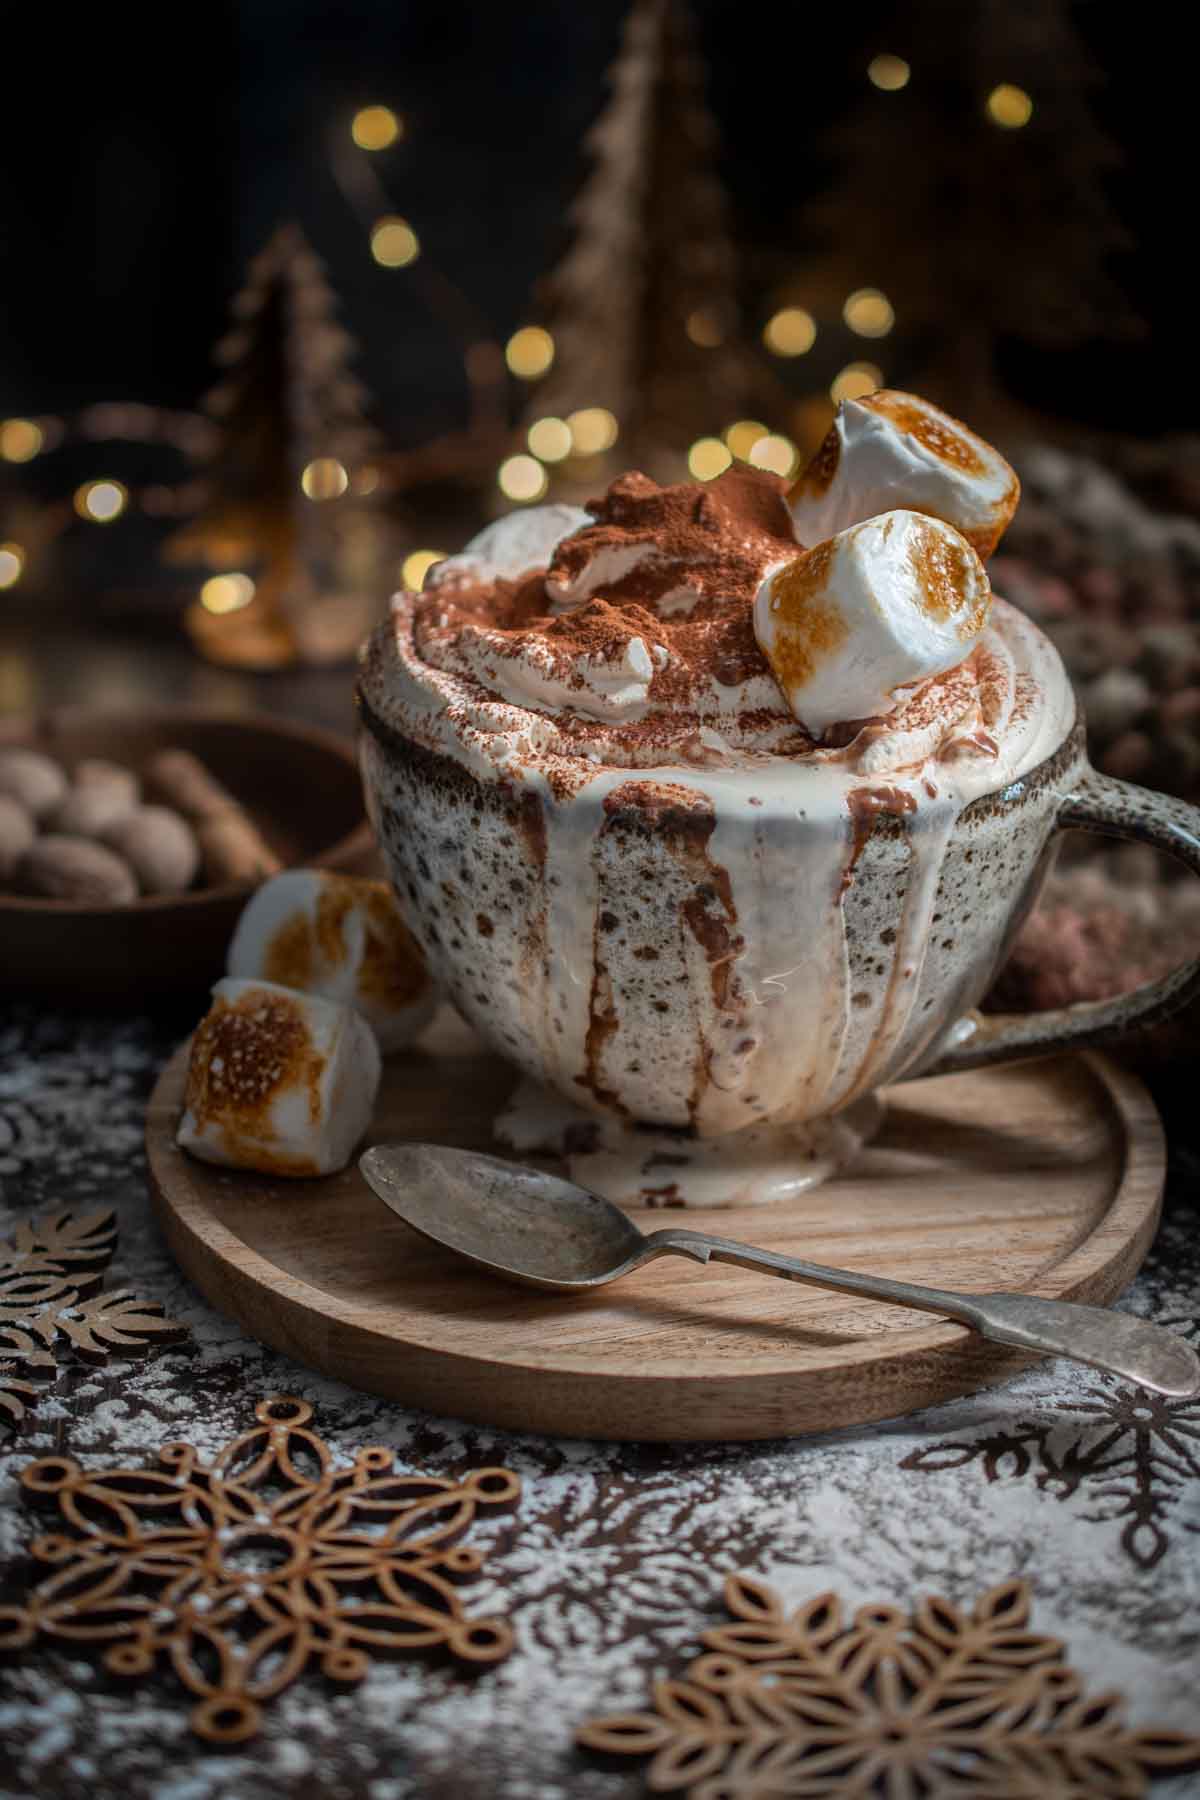 Christmas hot chocolate with cream, toasted marshmallows and cinnamon in a mug with a spoon, festive decorations, and lights